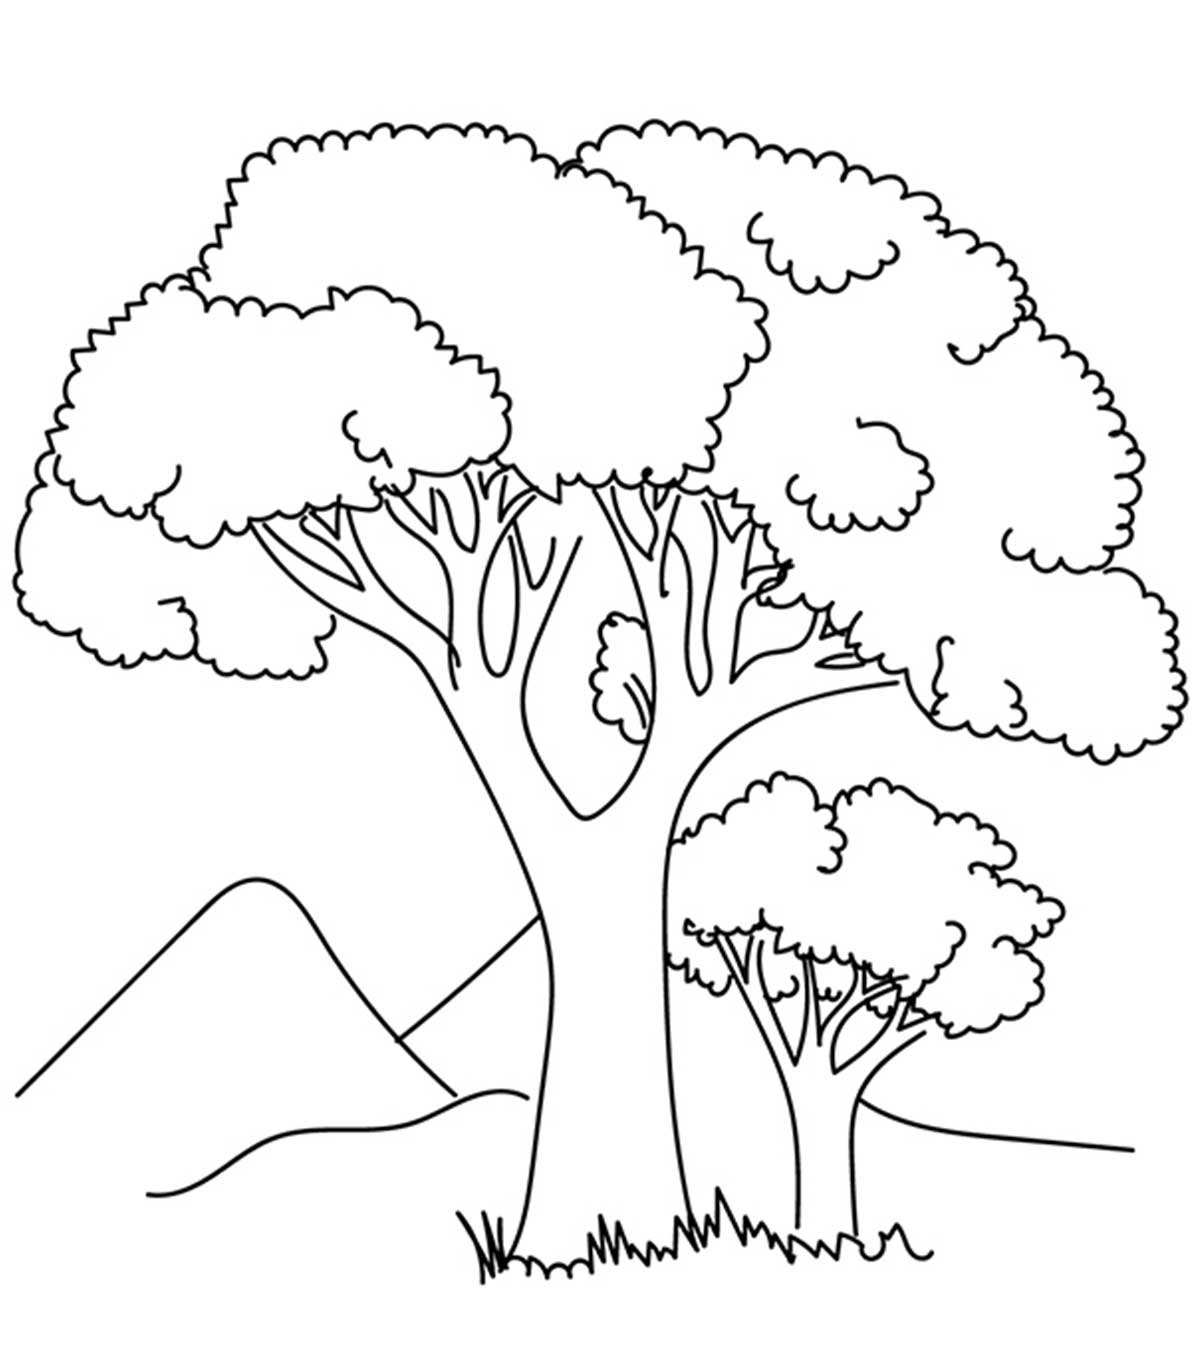 Green Beans Coloring Page Top 25 Tree Coloring Pages For Your Little Ones